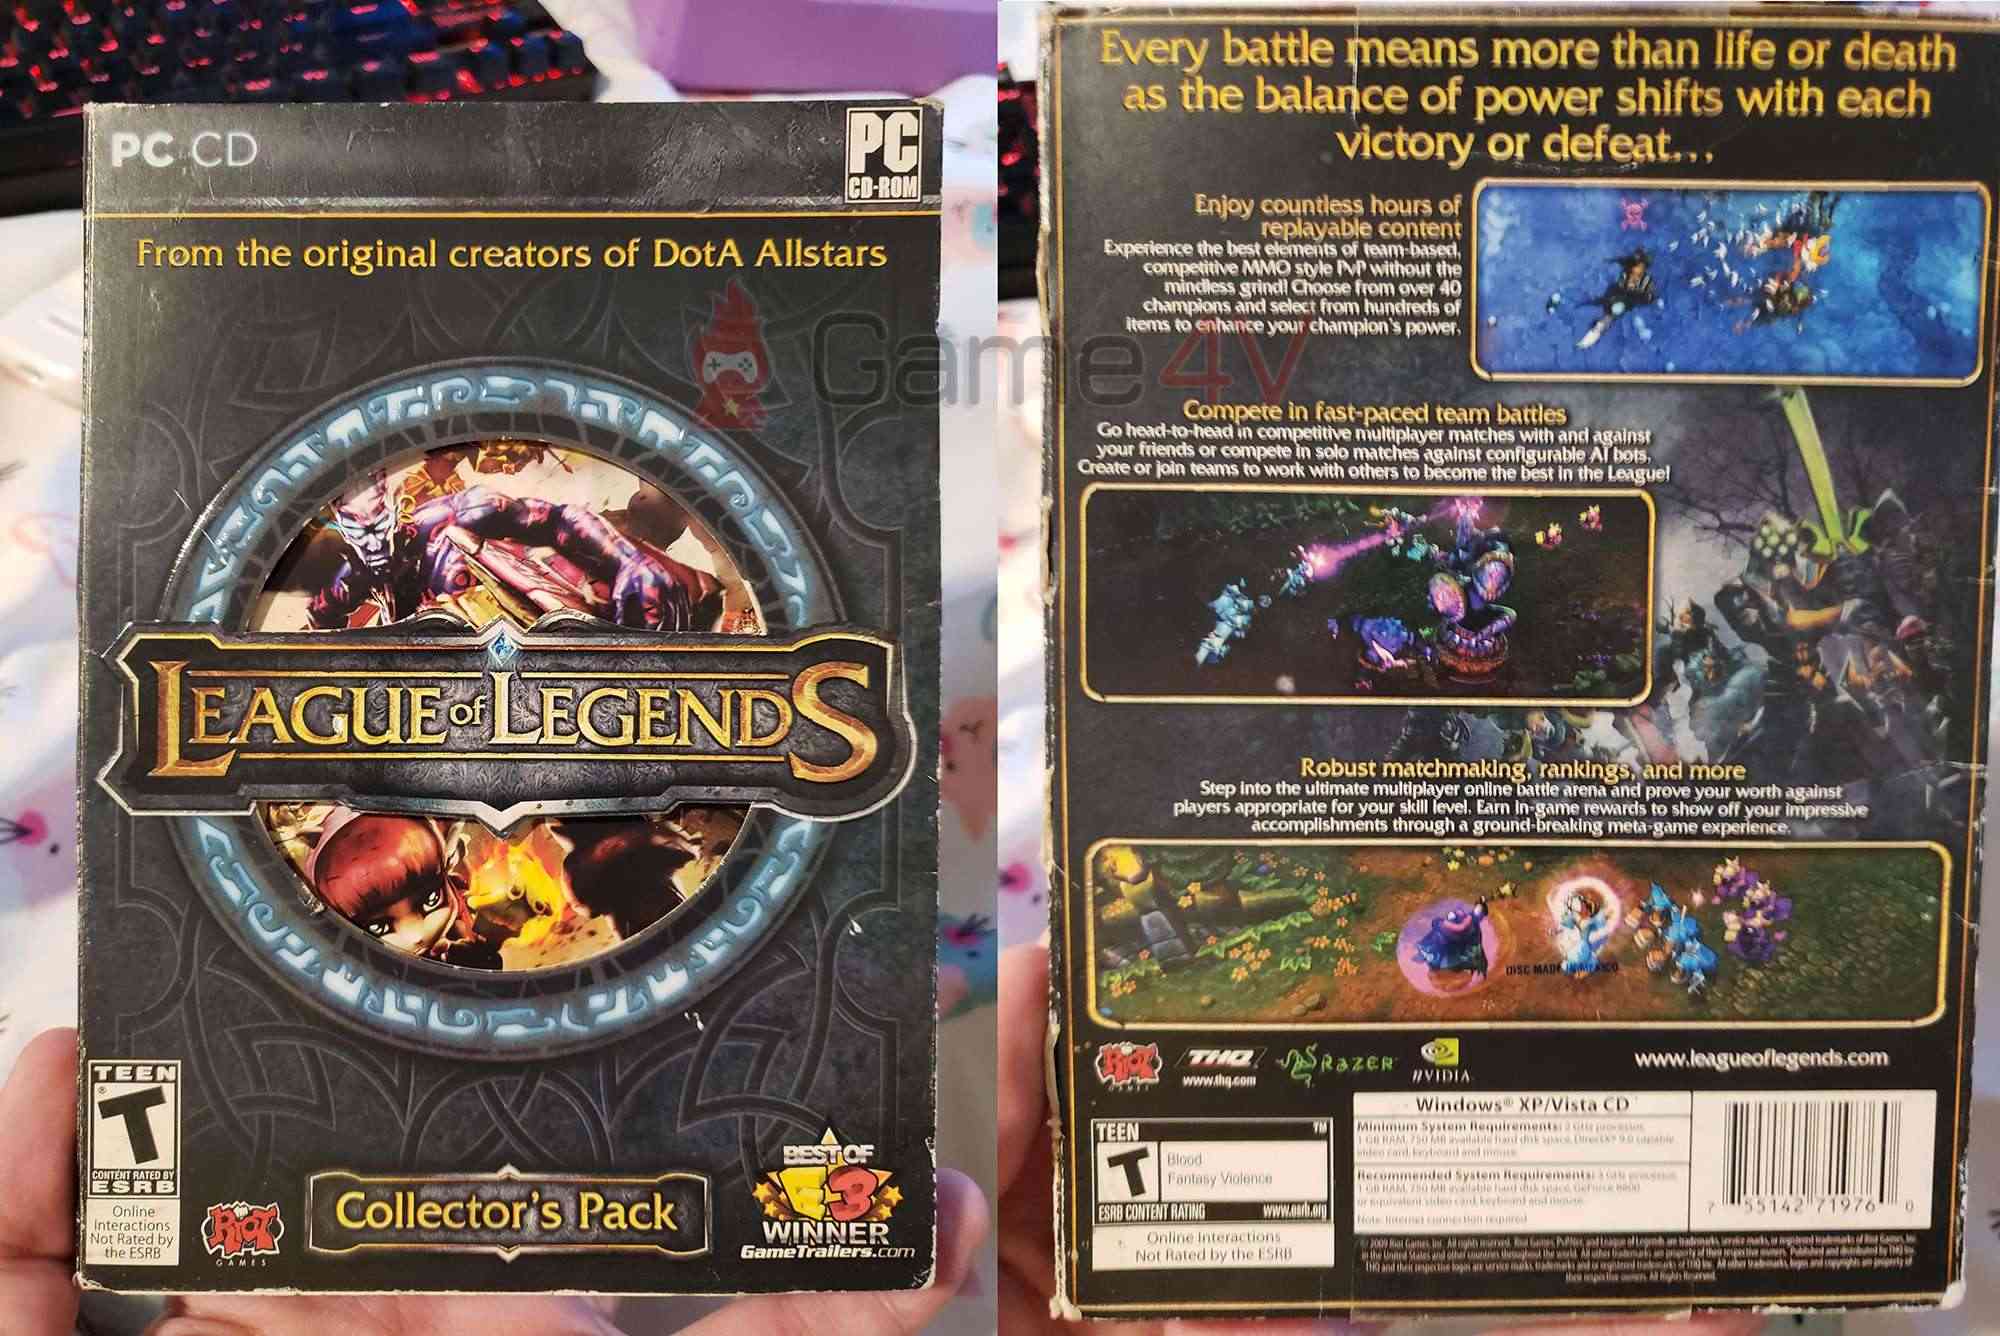 Cover photo of League of Legends CD box.